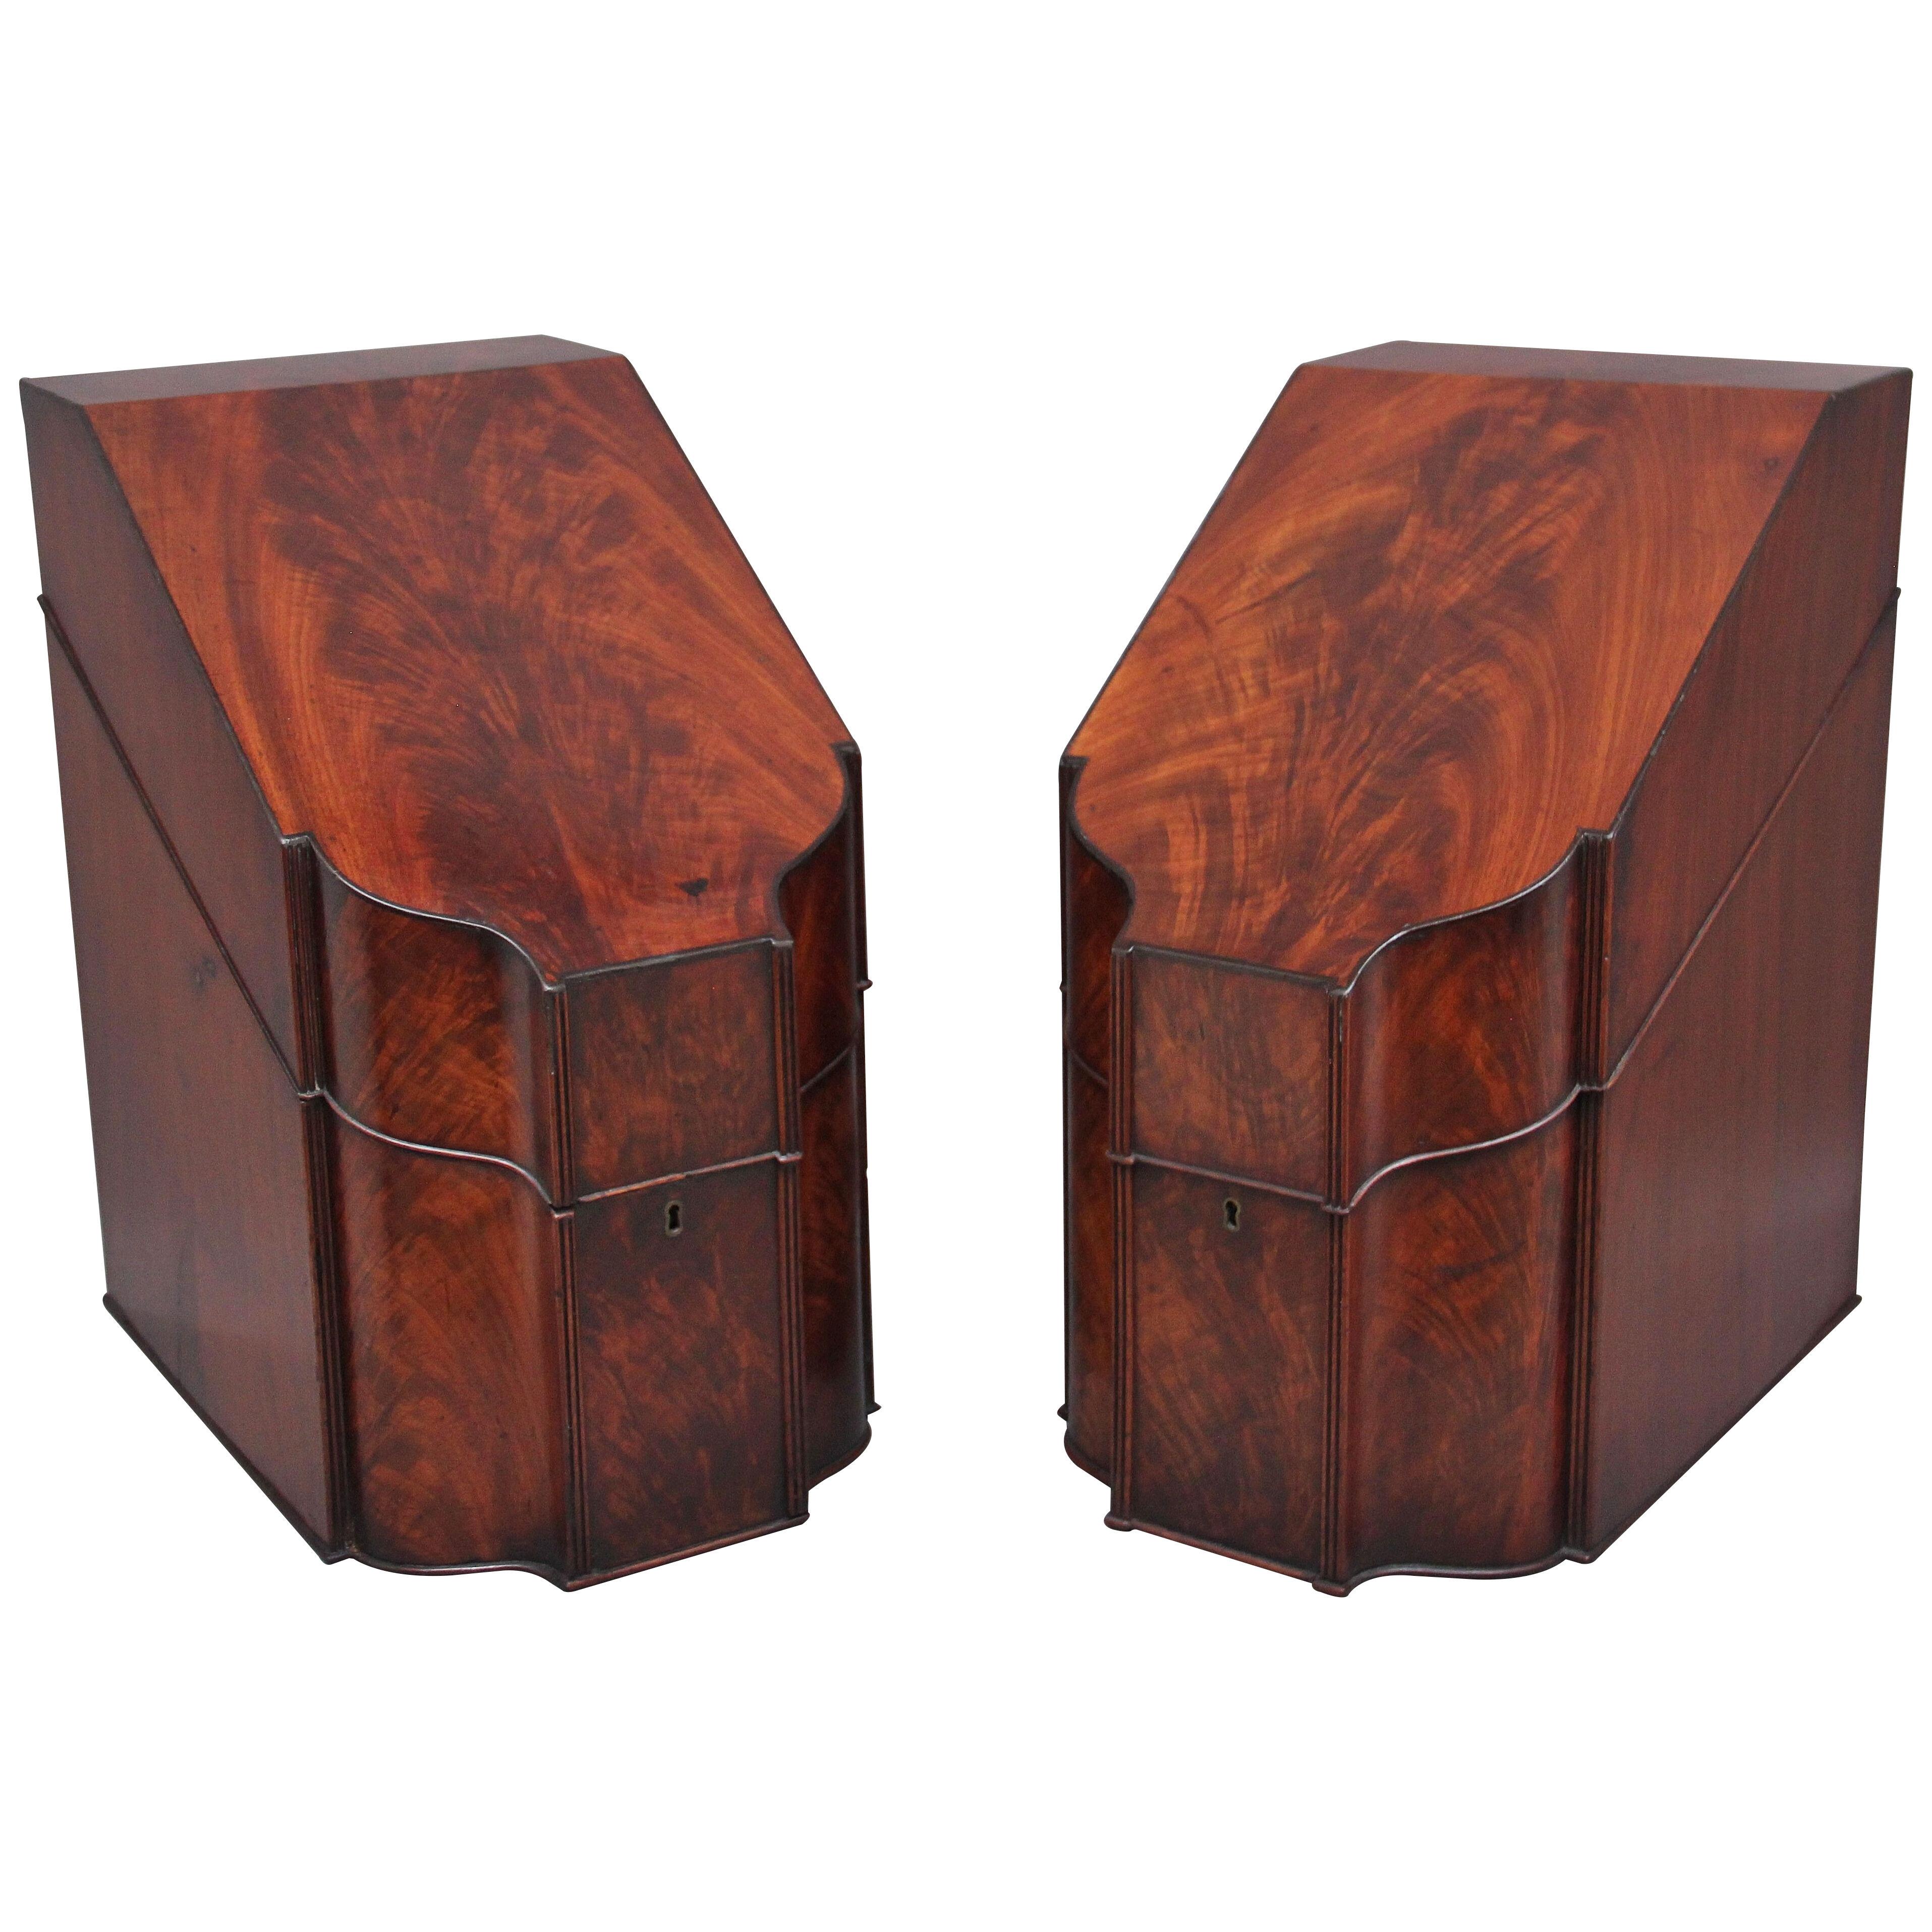 A pair of 18th Century antique mahogany knife boxes